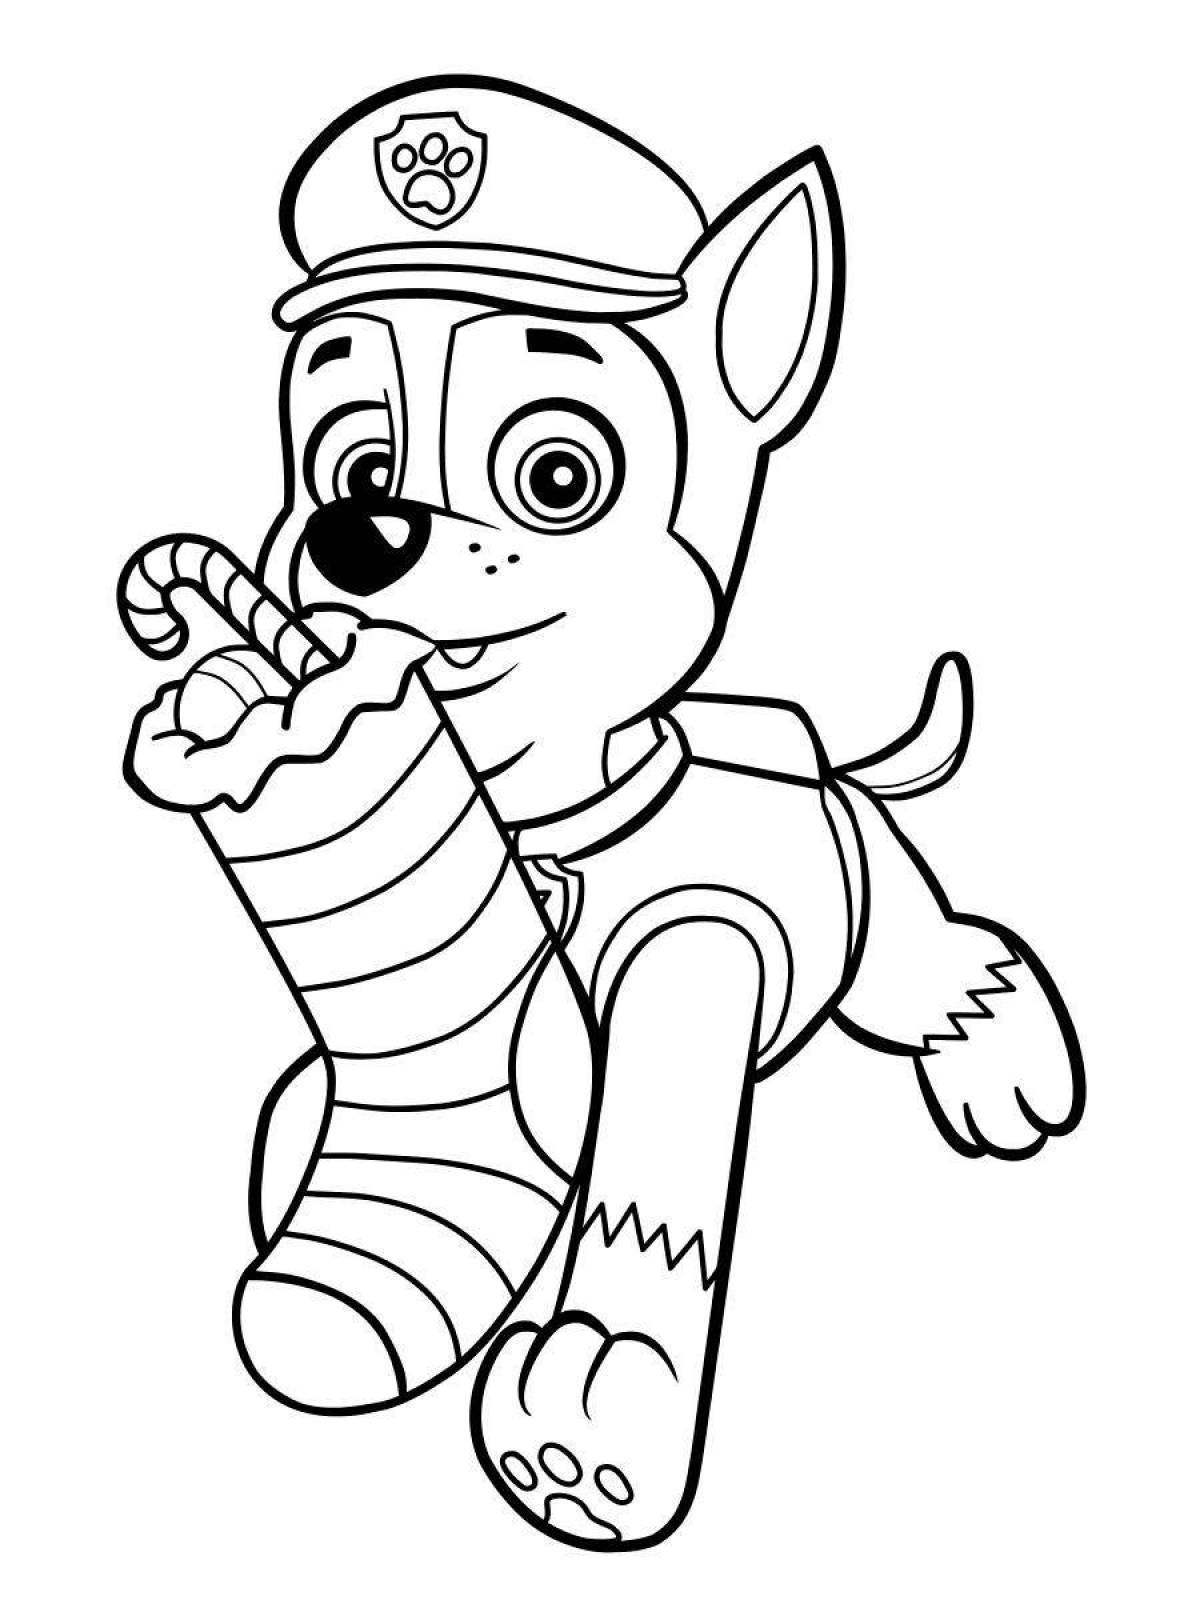 Coloring page great racer